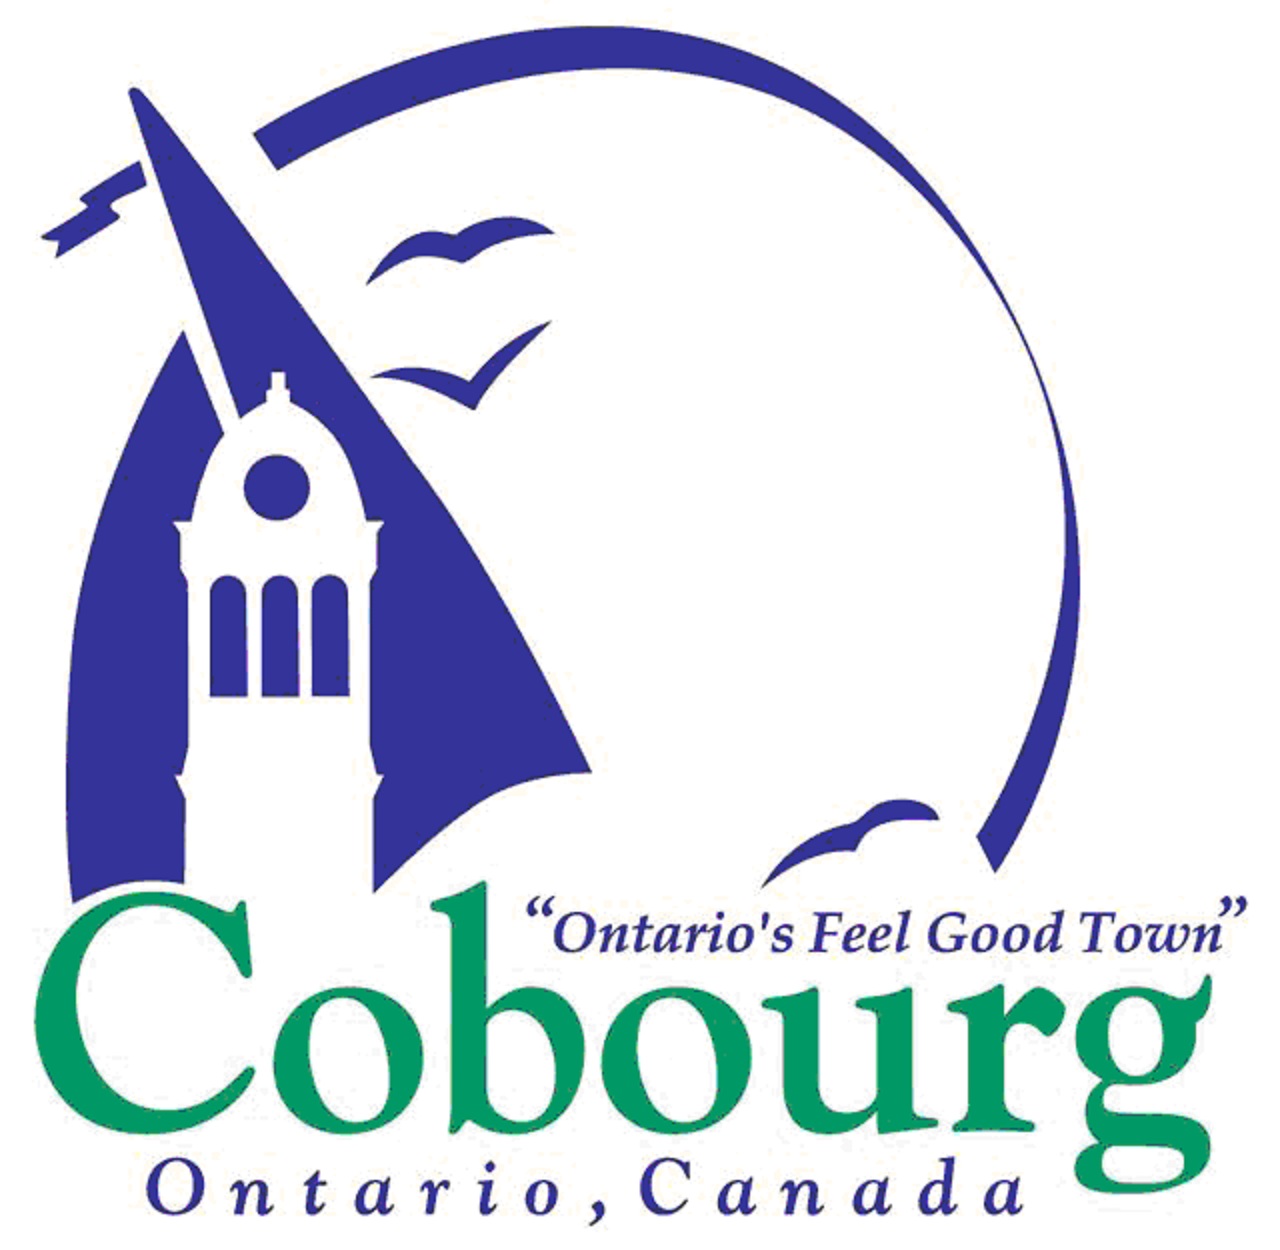 the word Cobourg appears in large green letters near the bottom with Ontario, Canada in blue beneath. Against a white background a stylized sail in blue outlines a cupola. The sail and three stylized birds, also in blue, are enclosed by a half circle blue ribbon.